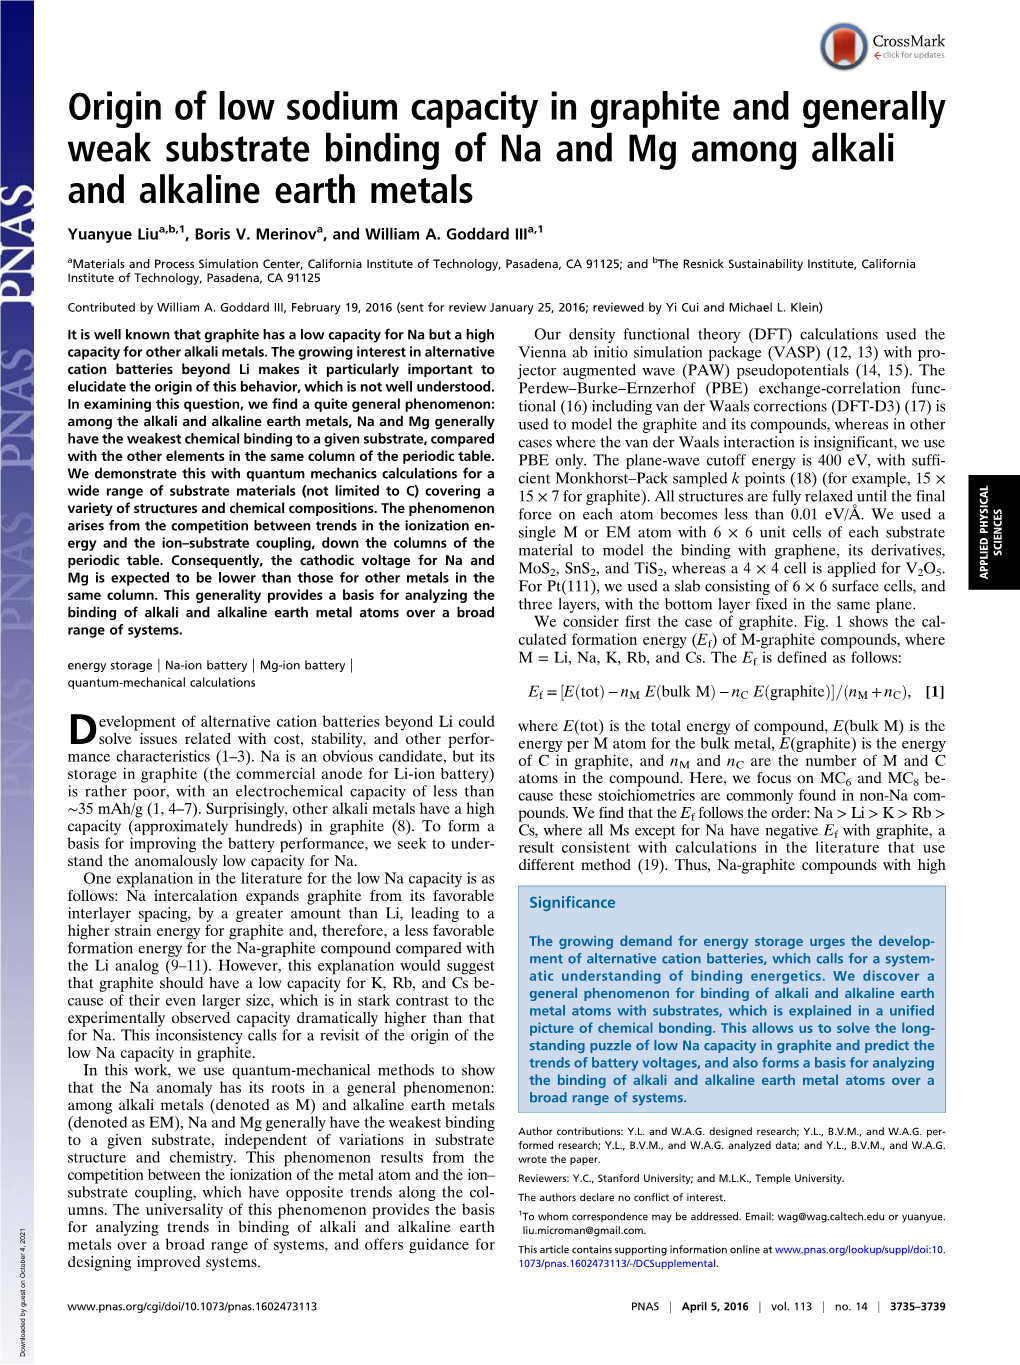 Origin of Low Sodium Capacity in Graphite and Generally Weak Substrate Binding of Na and Mg Among Alkali and Alkaline Earth Metals